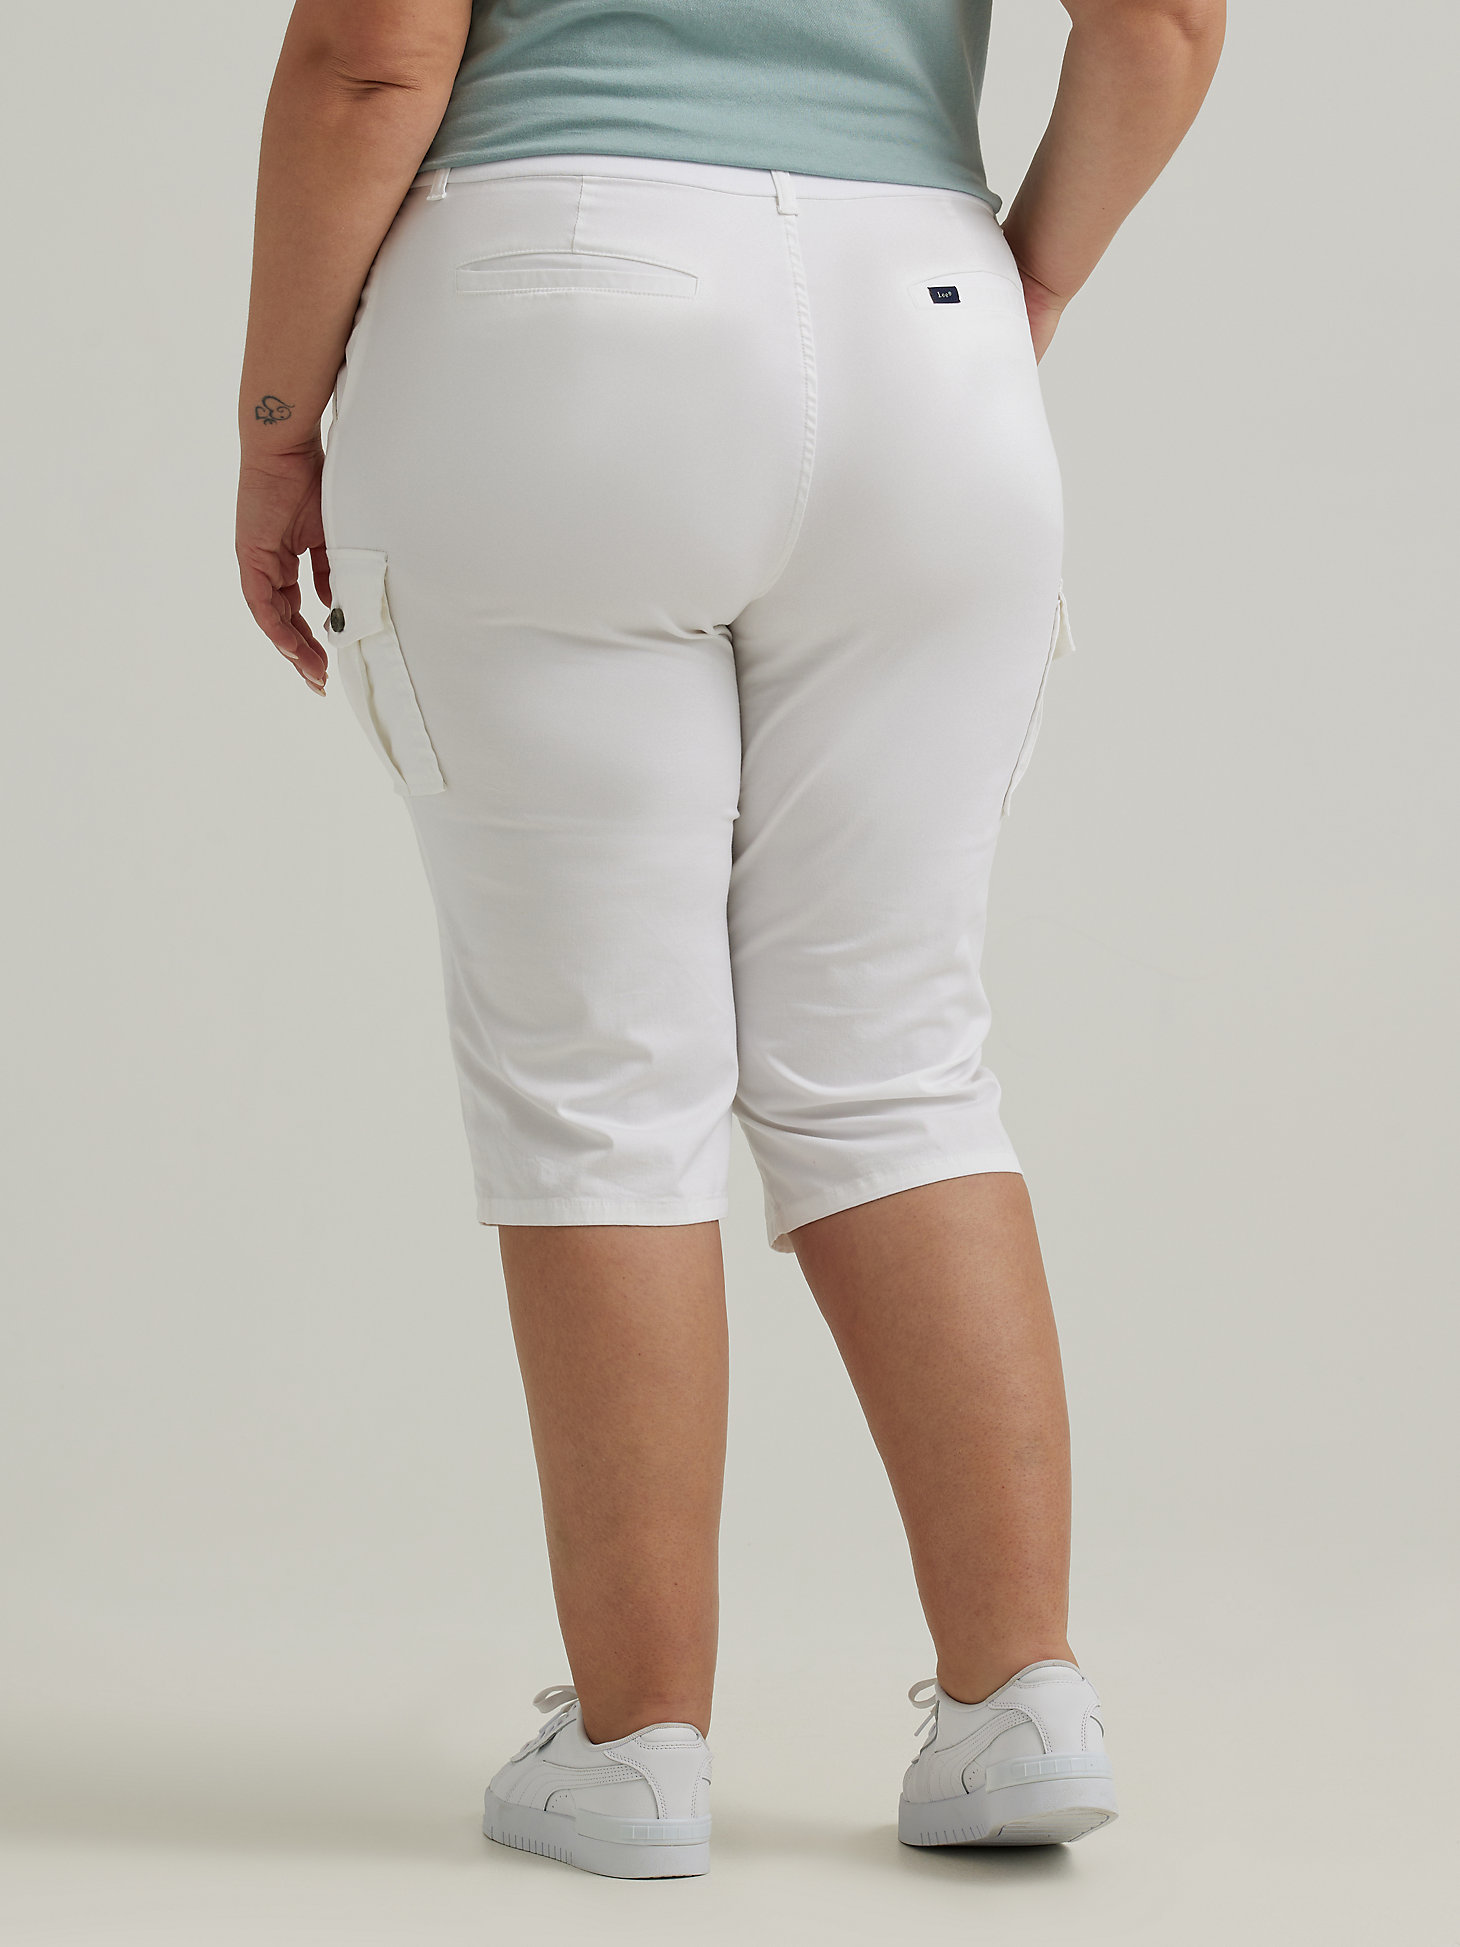 Women's Ultra Lux with Flex-to-Go Relaxed Cargo Skimmer (Plus) in White alternative view 1